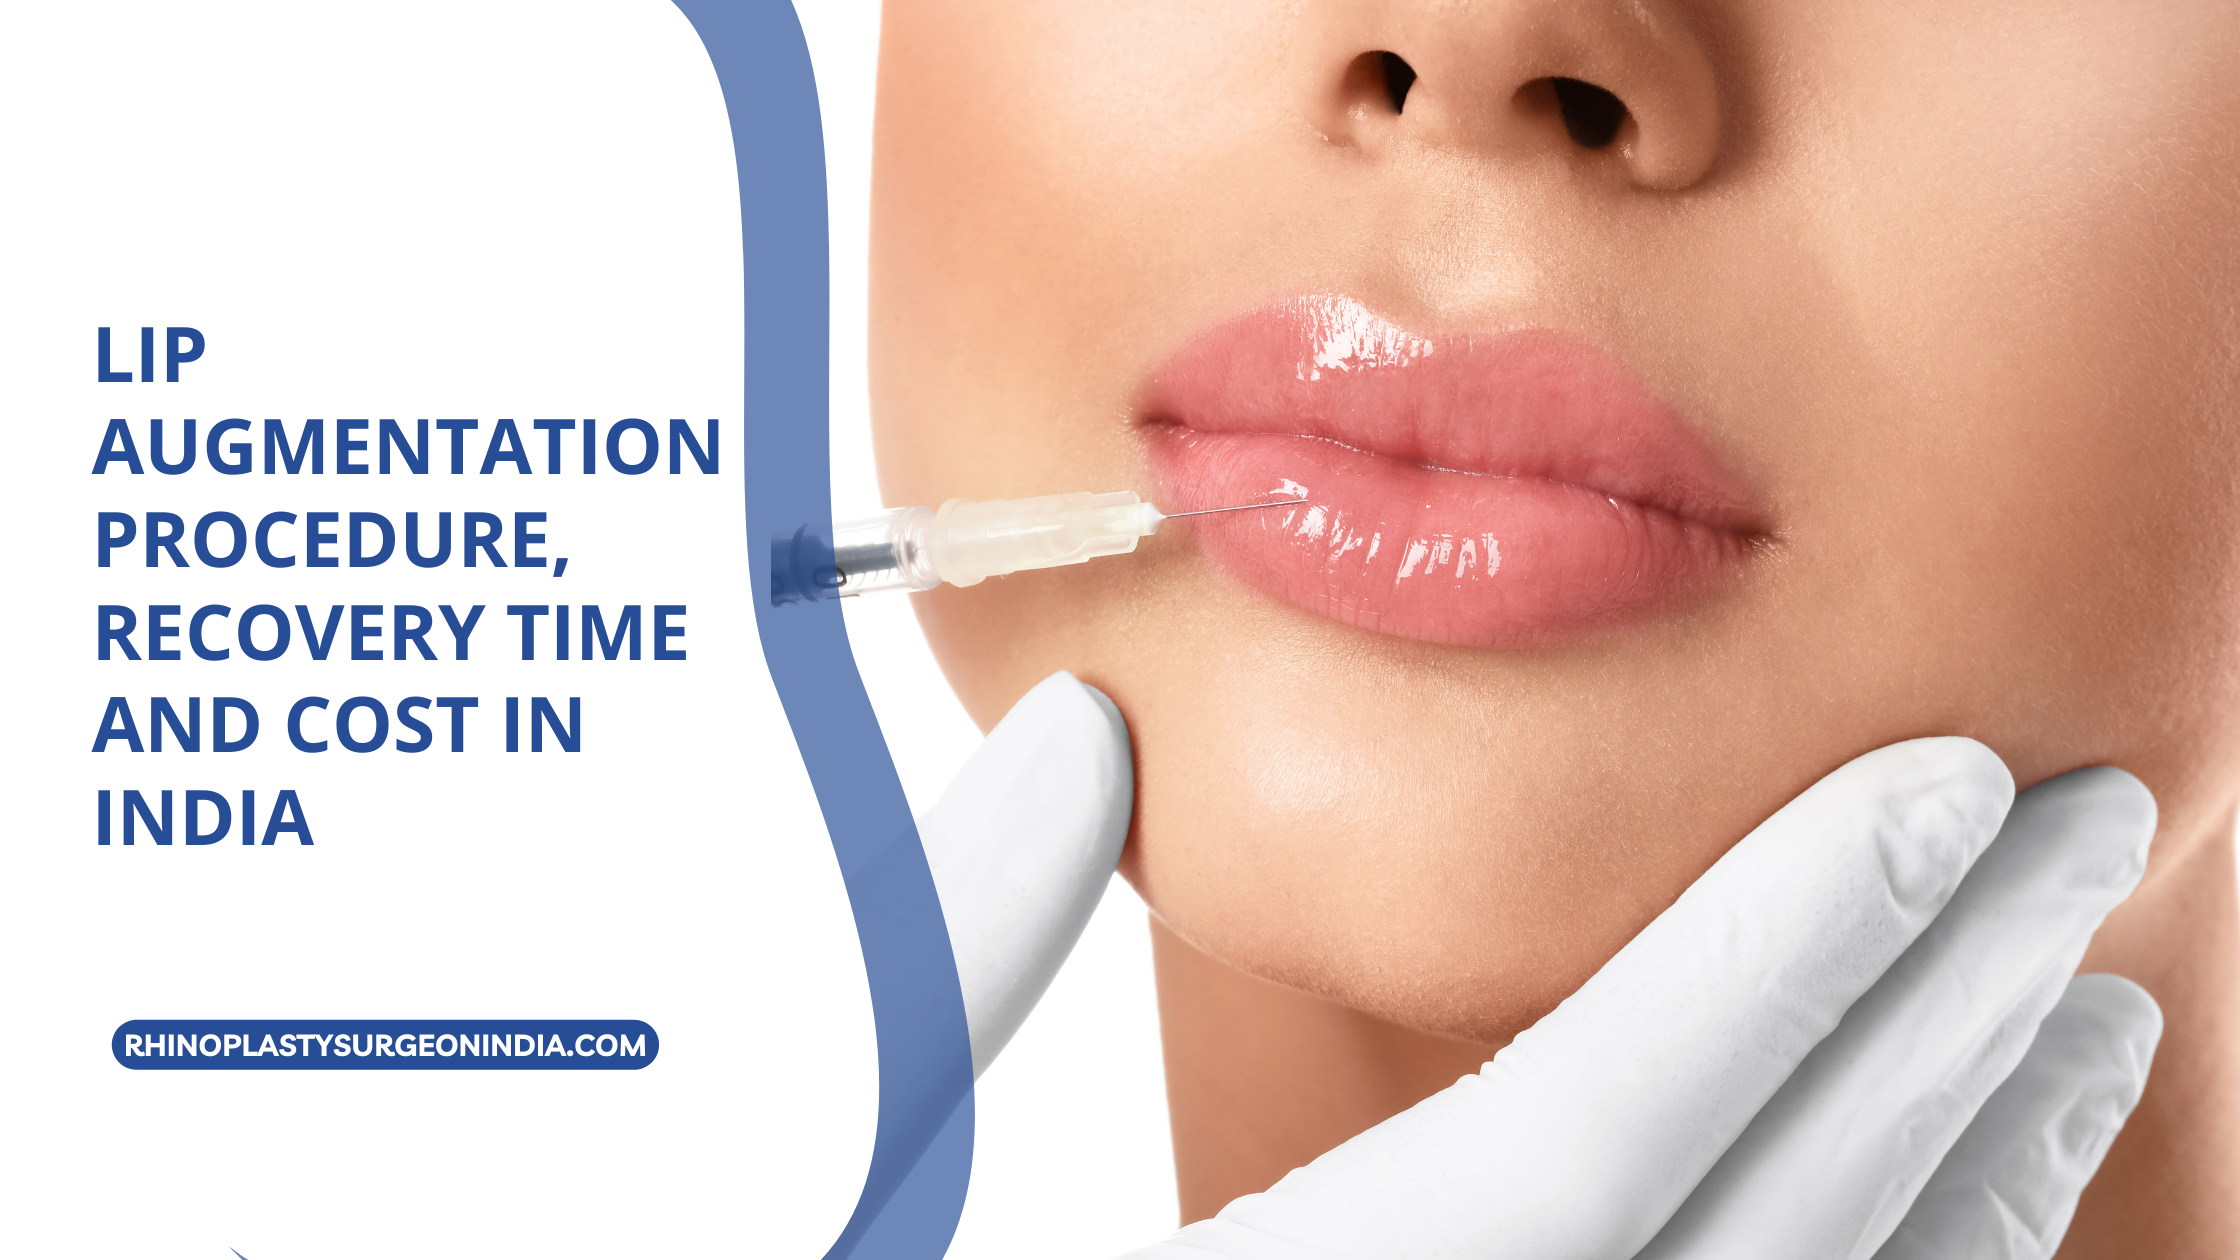 Lip Augmentation Procedure, Recovery Time and Cost in India